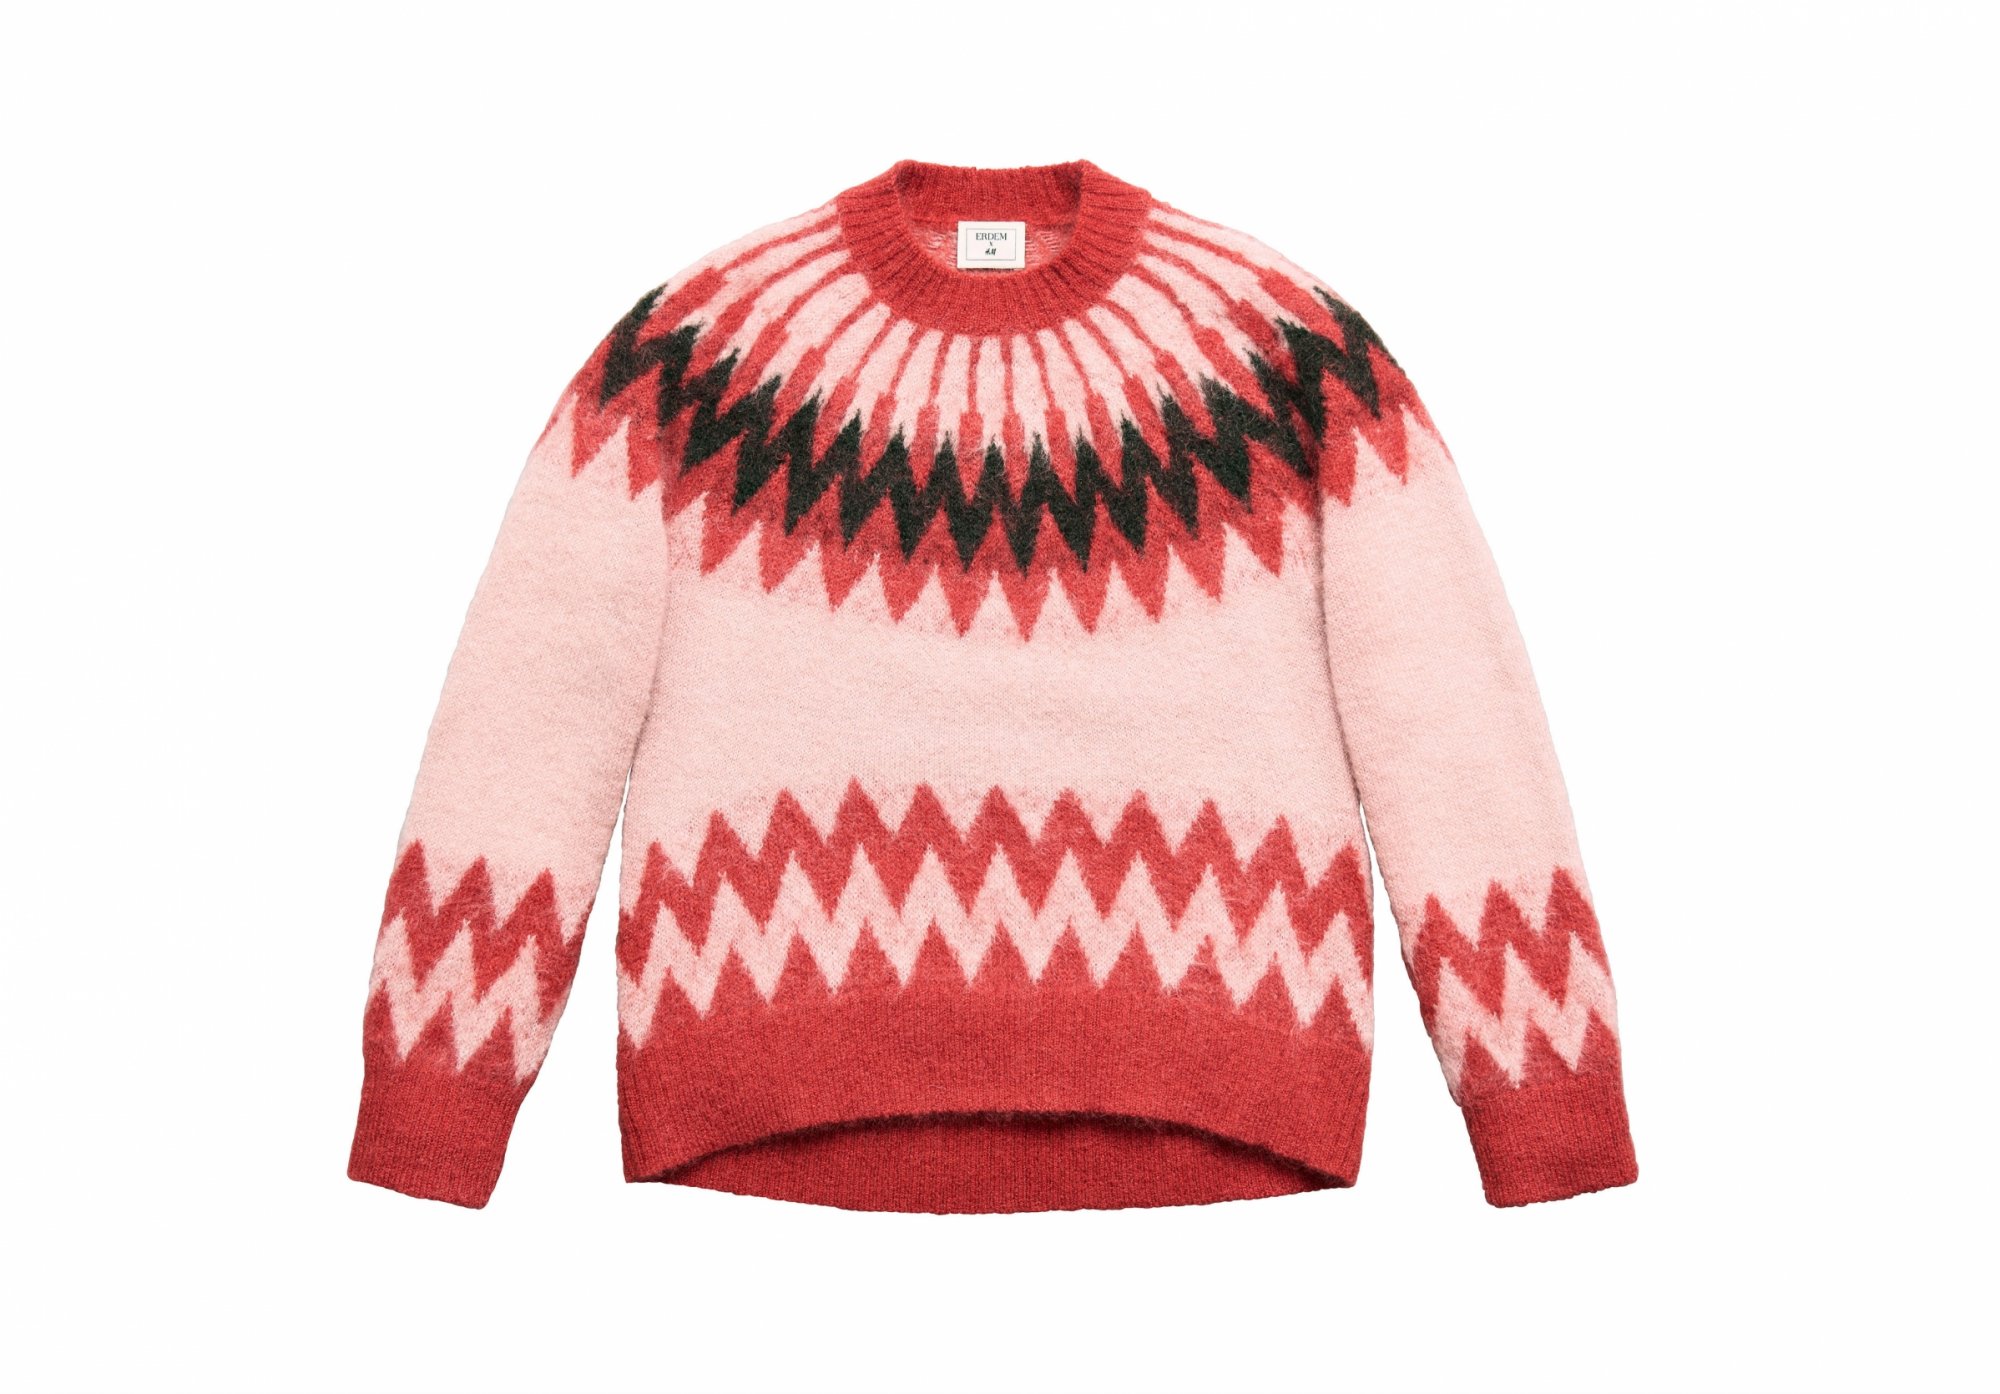 ski style sweater in shades of pink